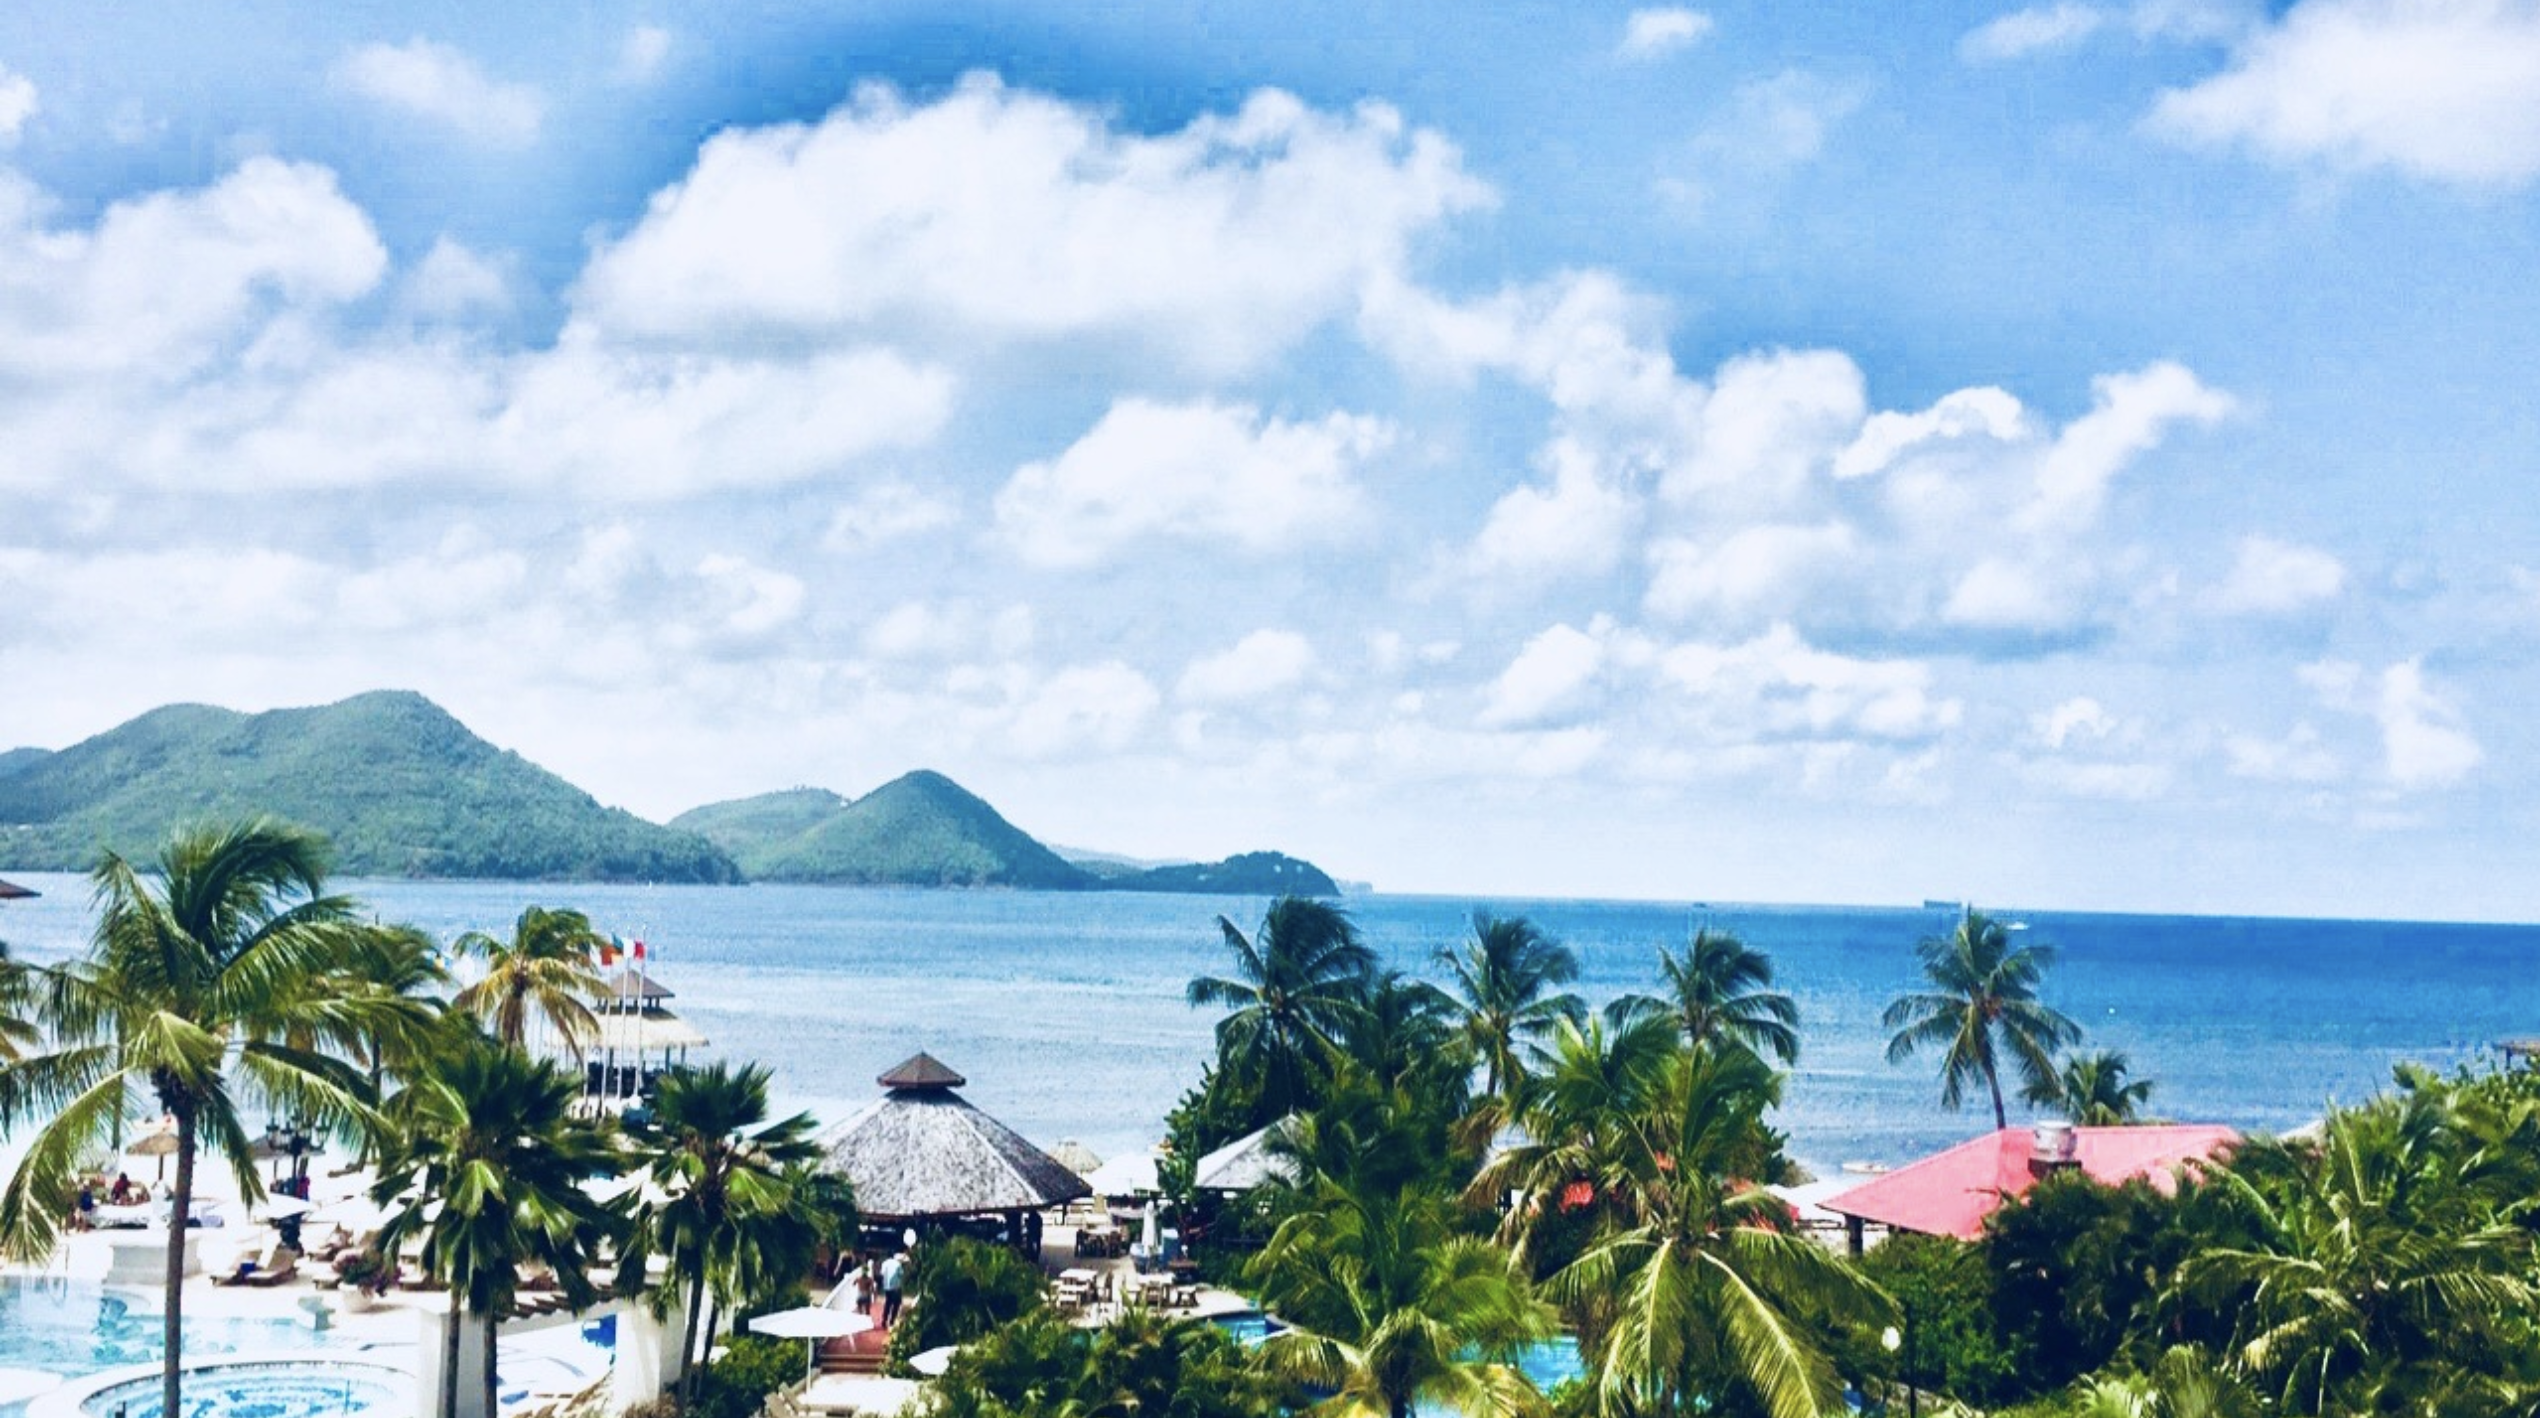 Sandals St. Lucian Resort Honeymoon planned by 2 Travel Anywhere | Nashville Bride Guide